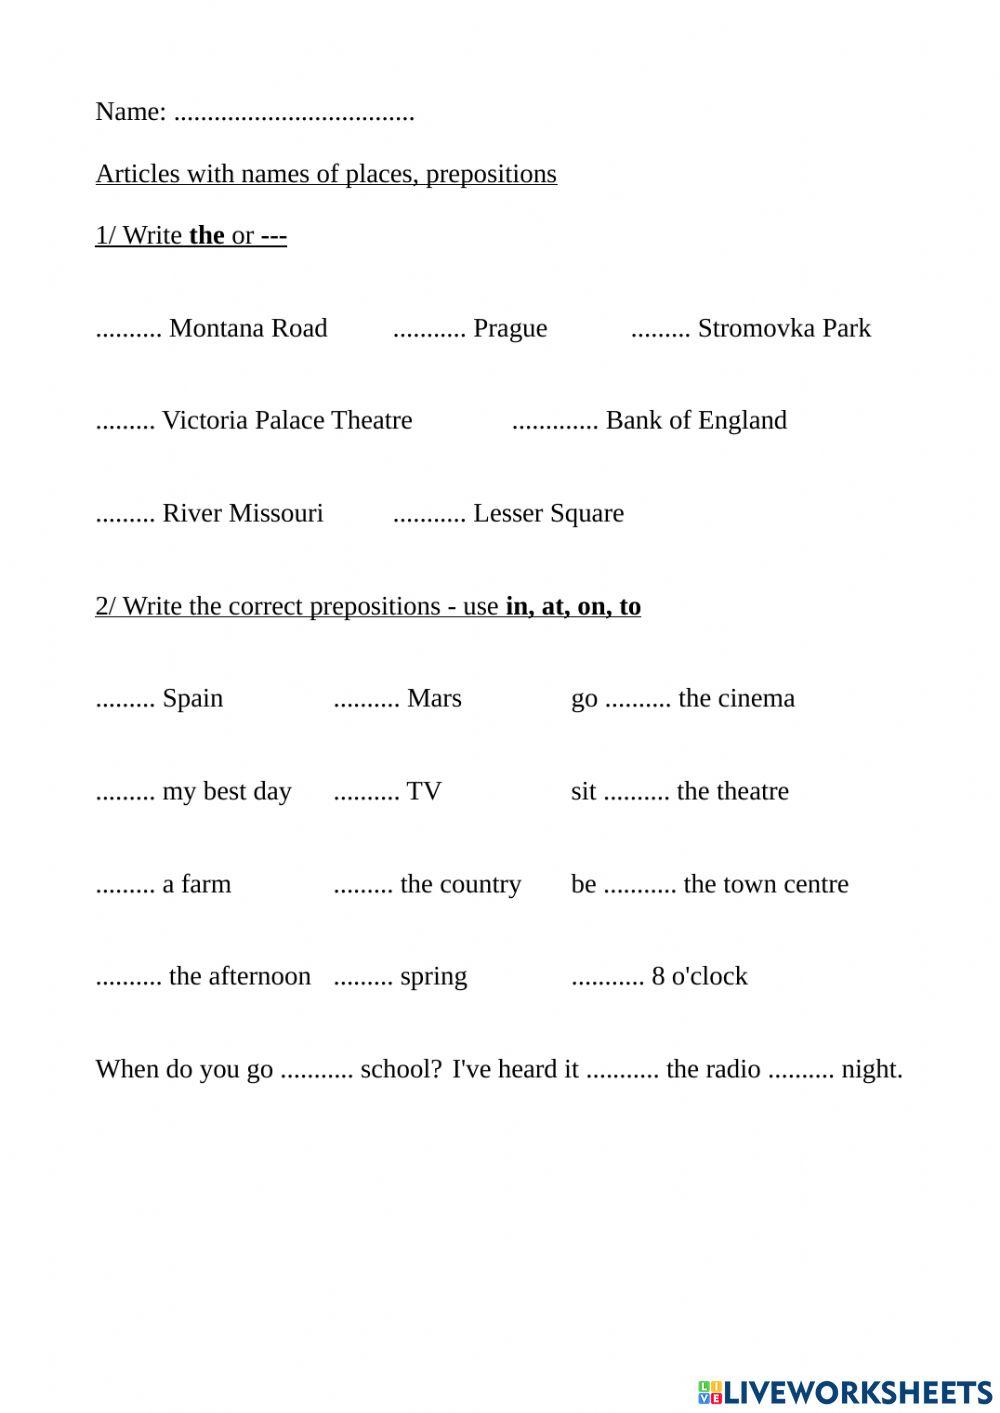 Articles with names of places, prepositions-2